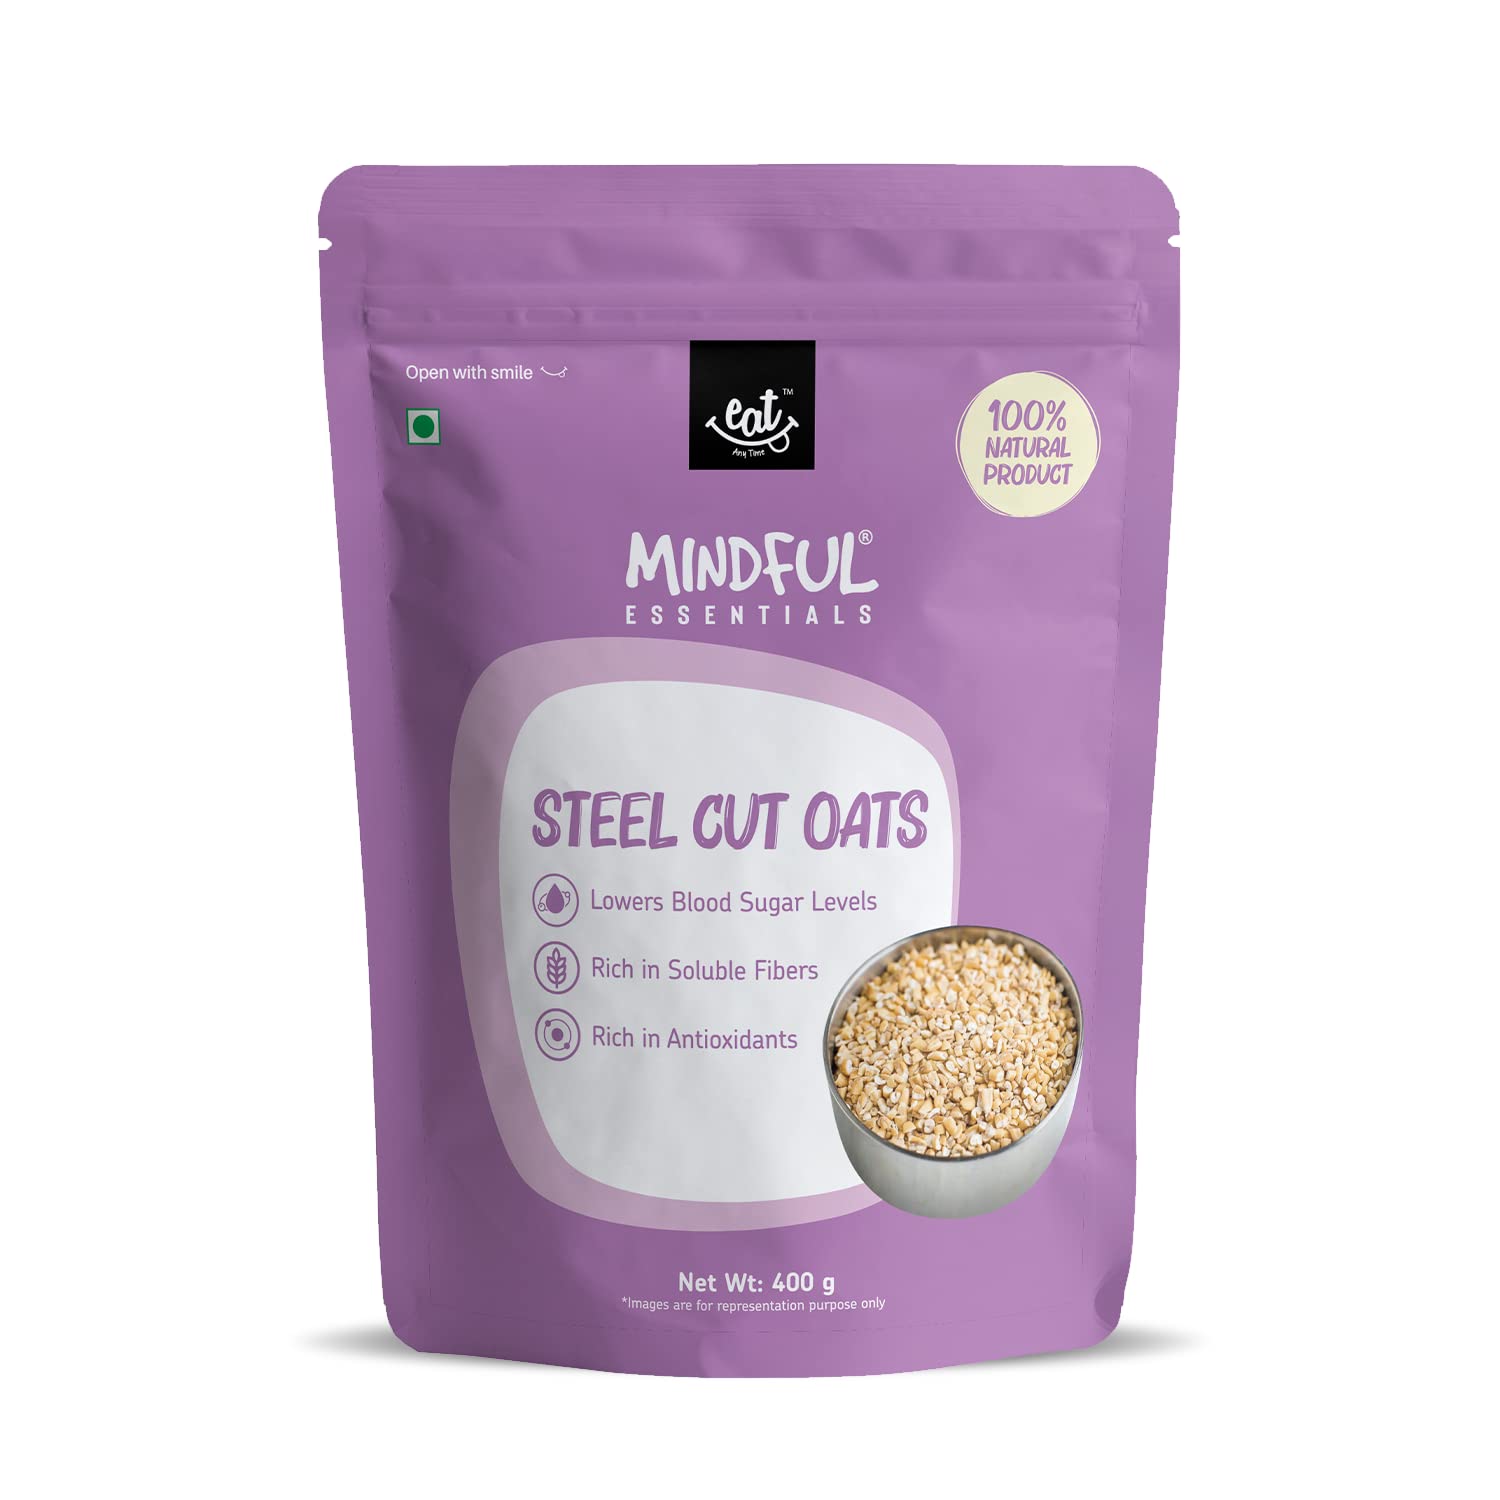 Steel Cut Oats at Best Price - EAT Anytime